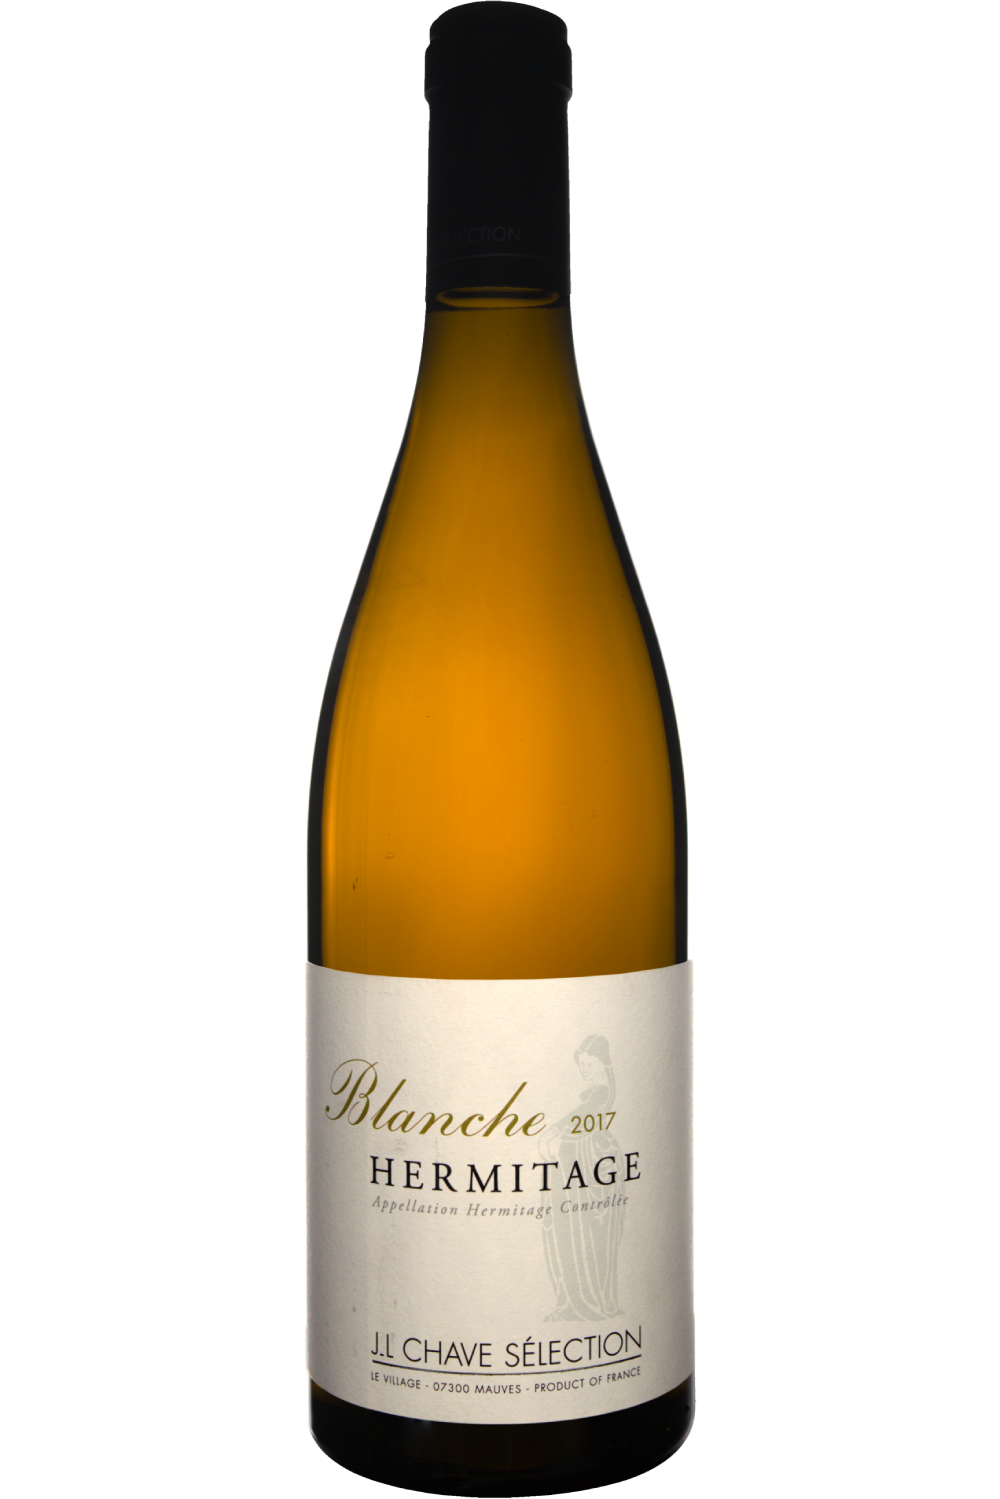 WineVins Jean-Louis Chave Selection Blanche Hermitage 2017